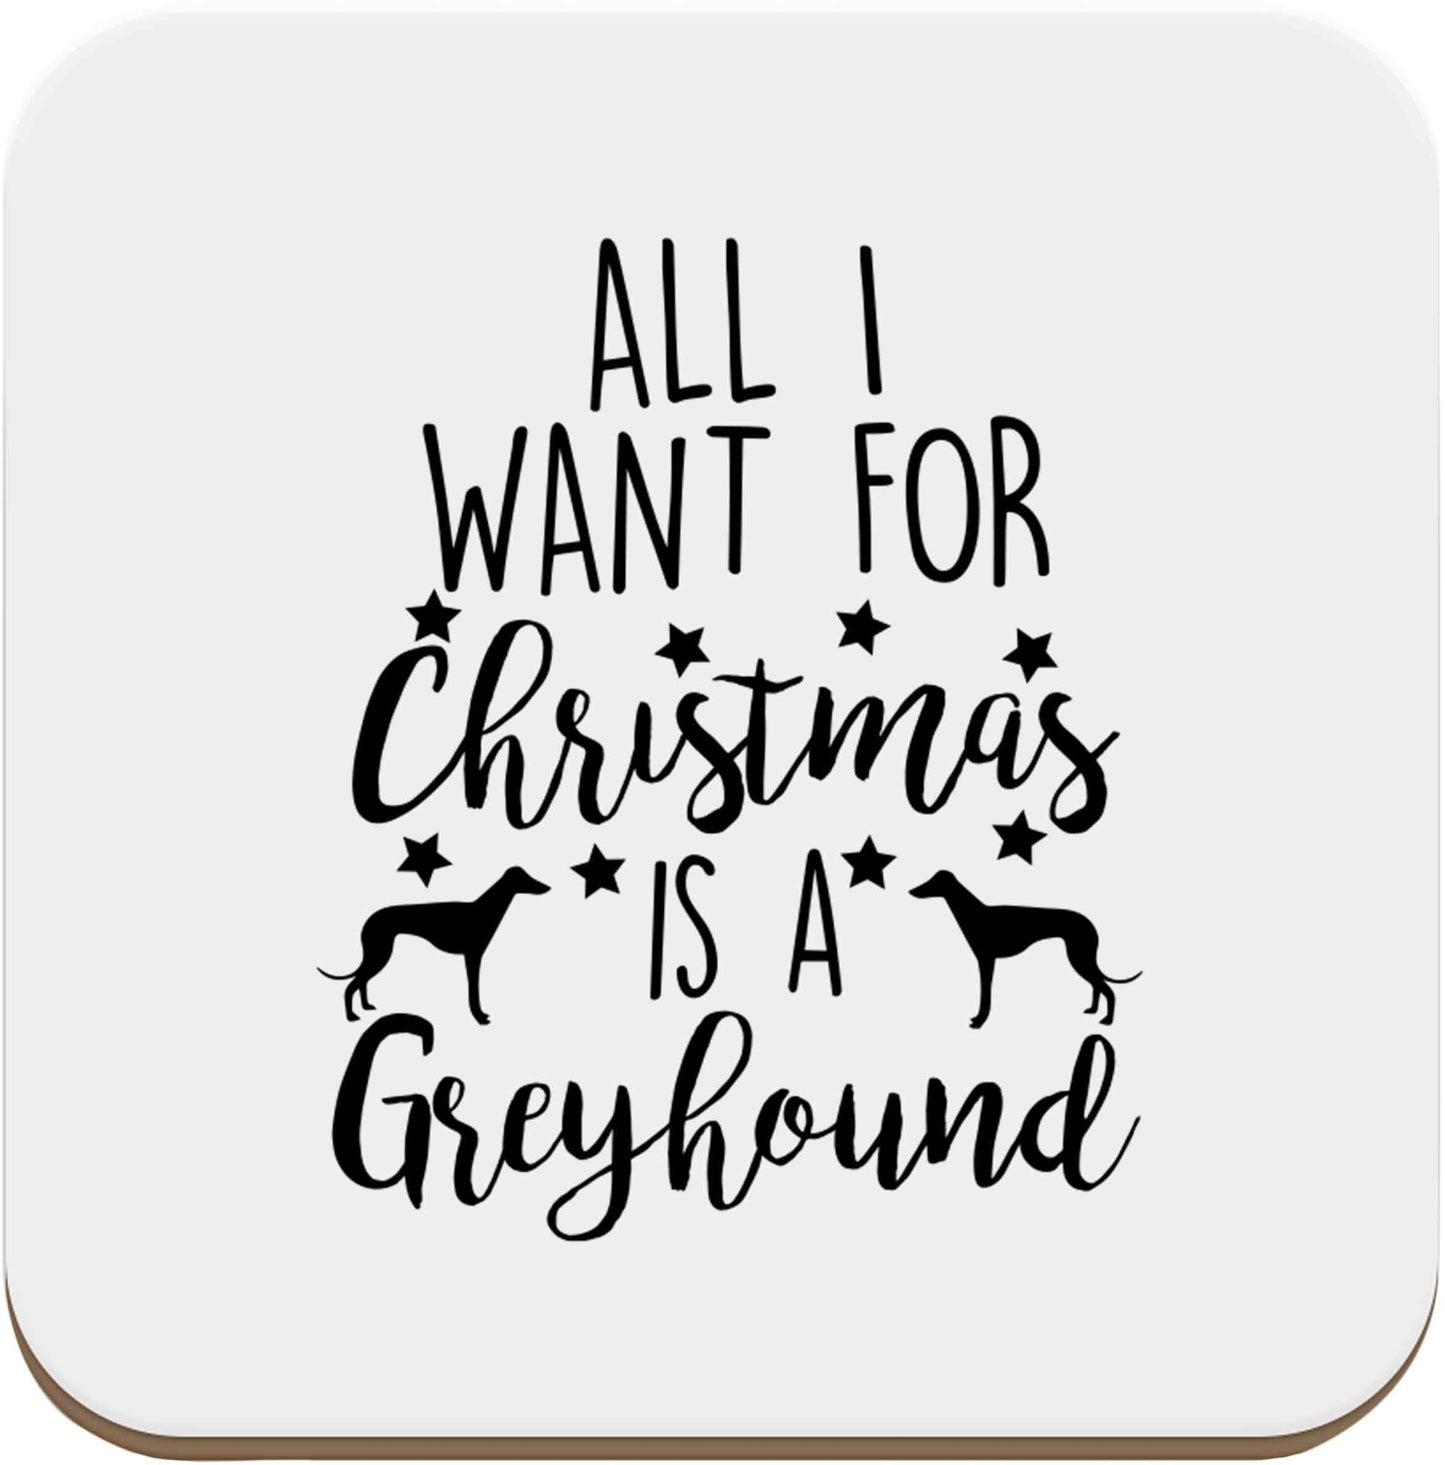 All I want for Christmas is a greyhound set of four coasters